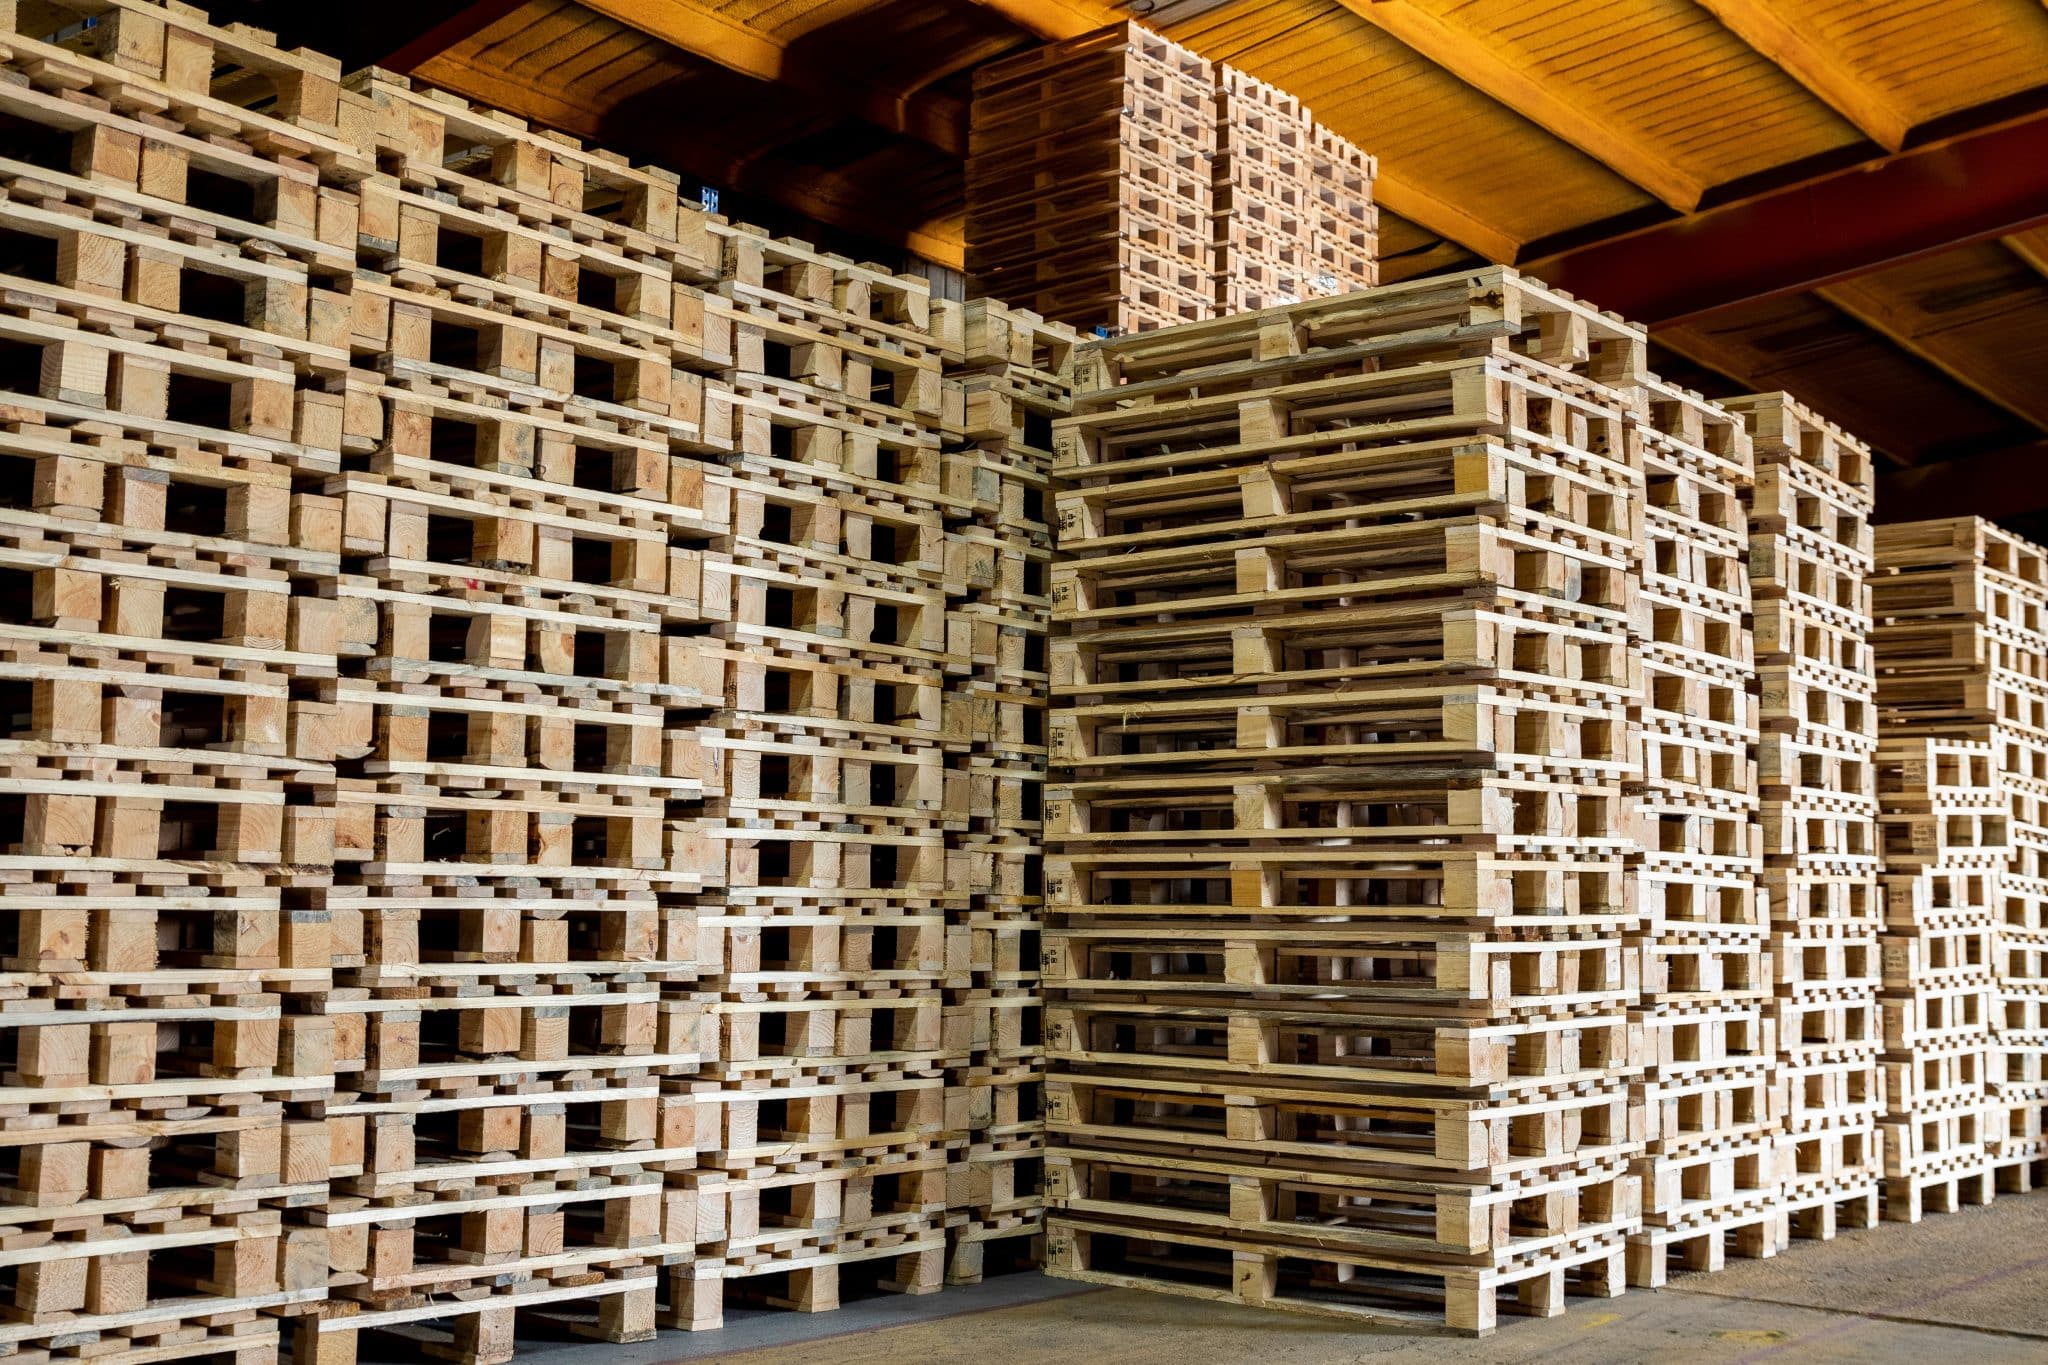 used wood pallets in Racine, high quality used wood pallets, reclaimed wood pallets near Racine